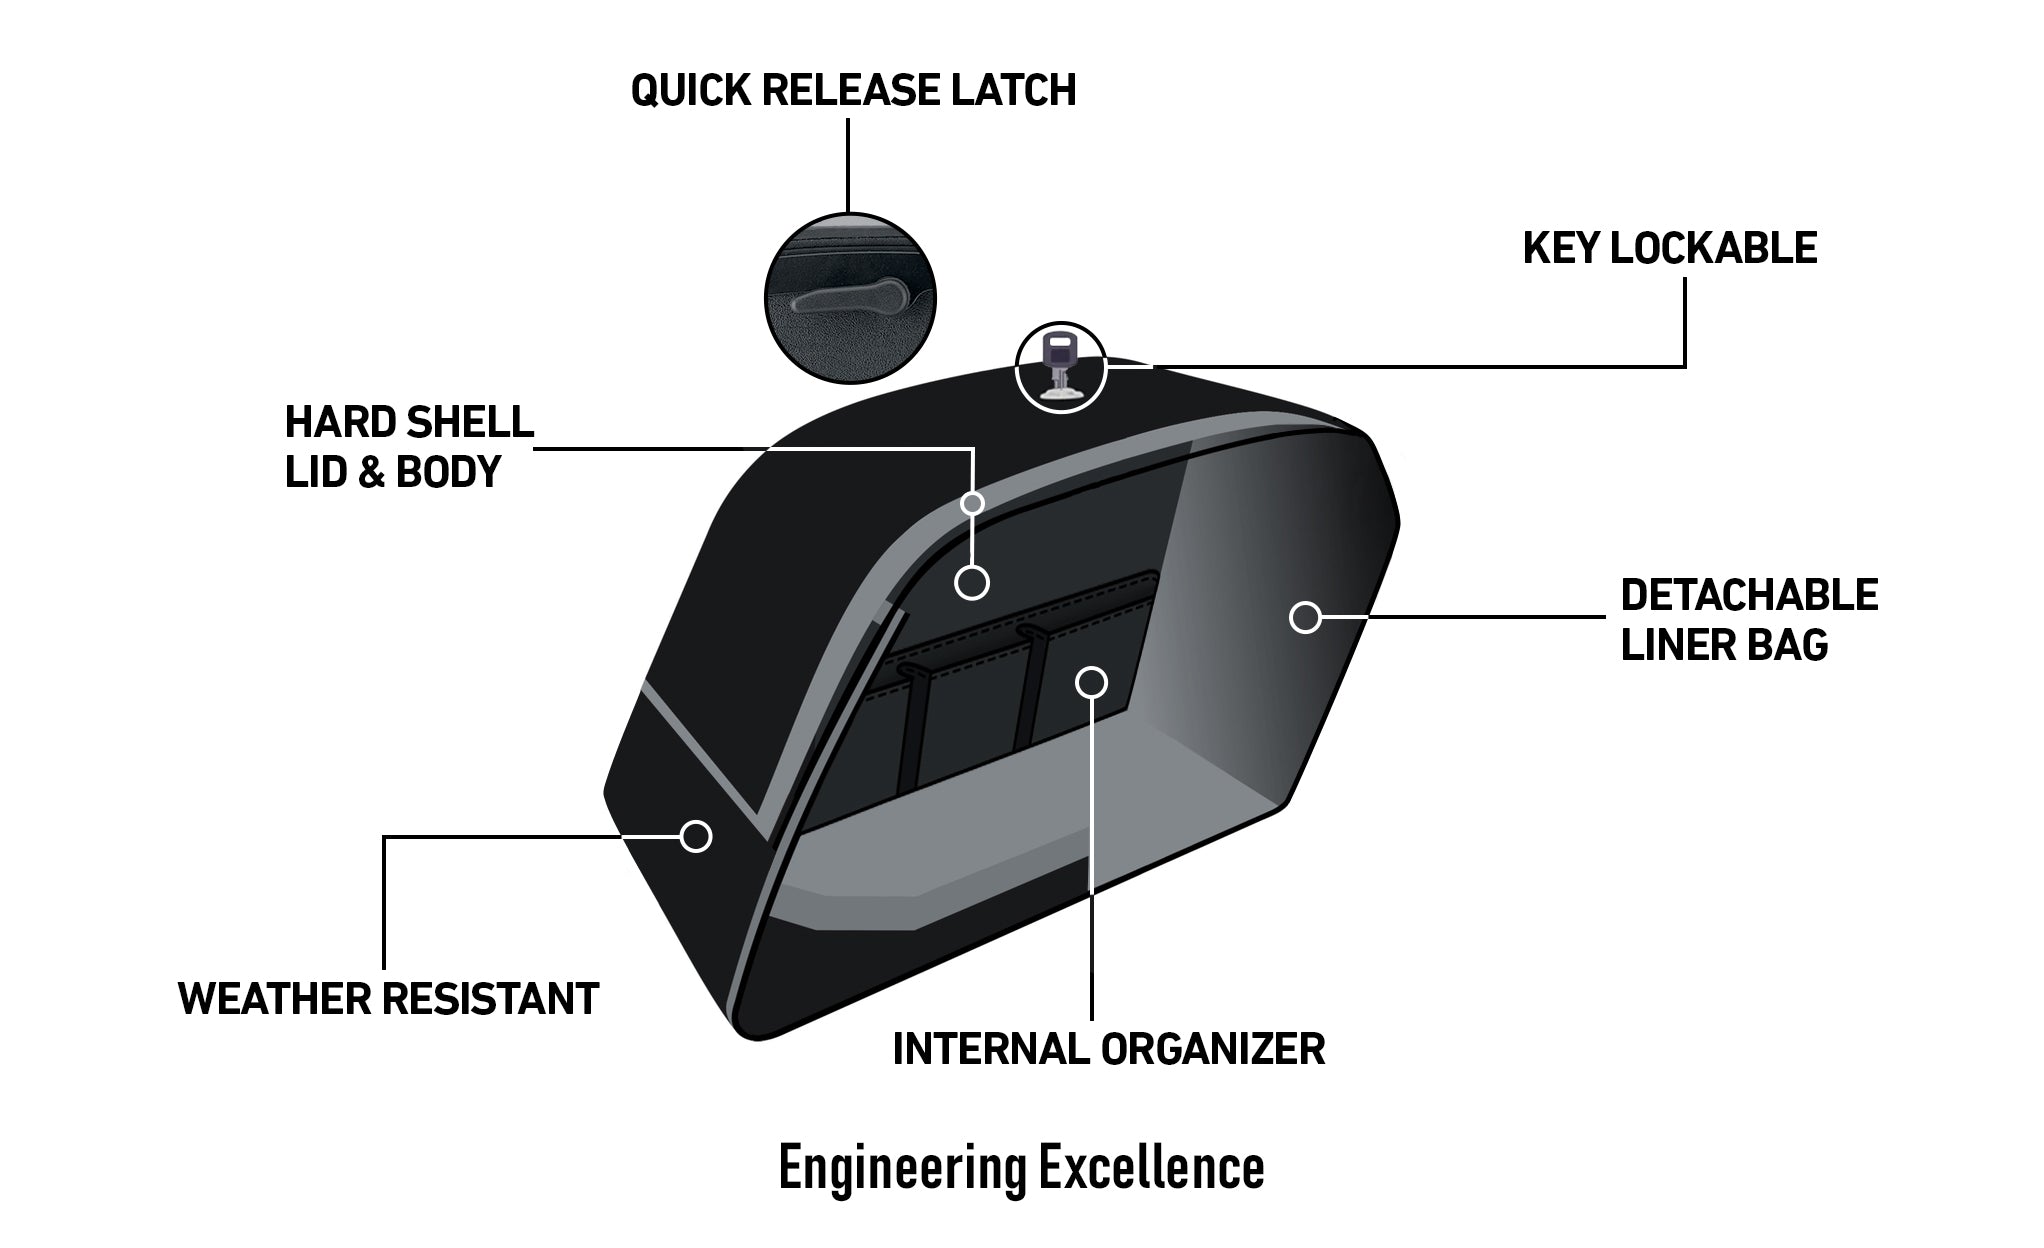 Viking Baldur Extra Large Matte Motorcycle Hard Saddlebags For Harley Softail Fat Boy Lo Flstfb Engineering Excellence with Bag on Bike @expand